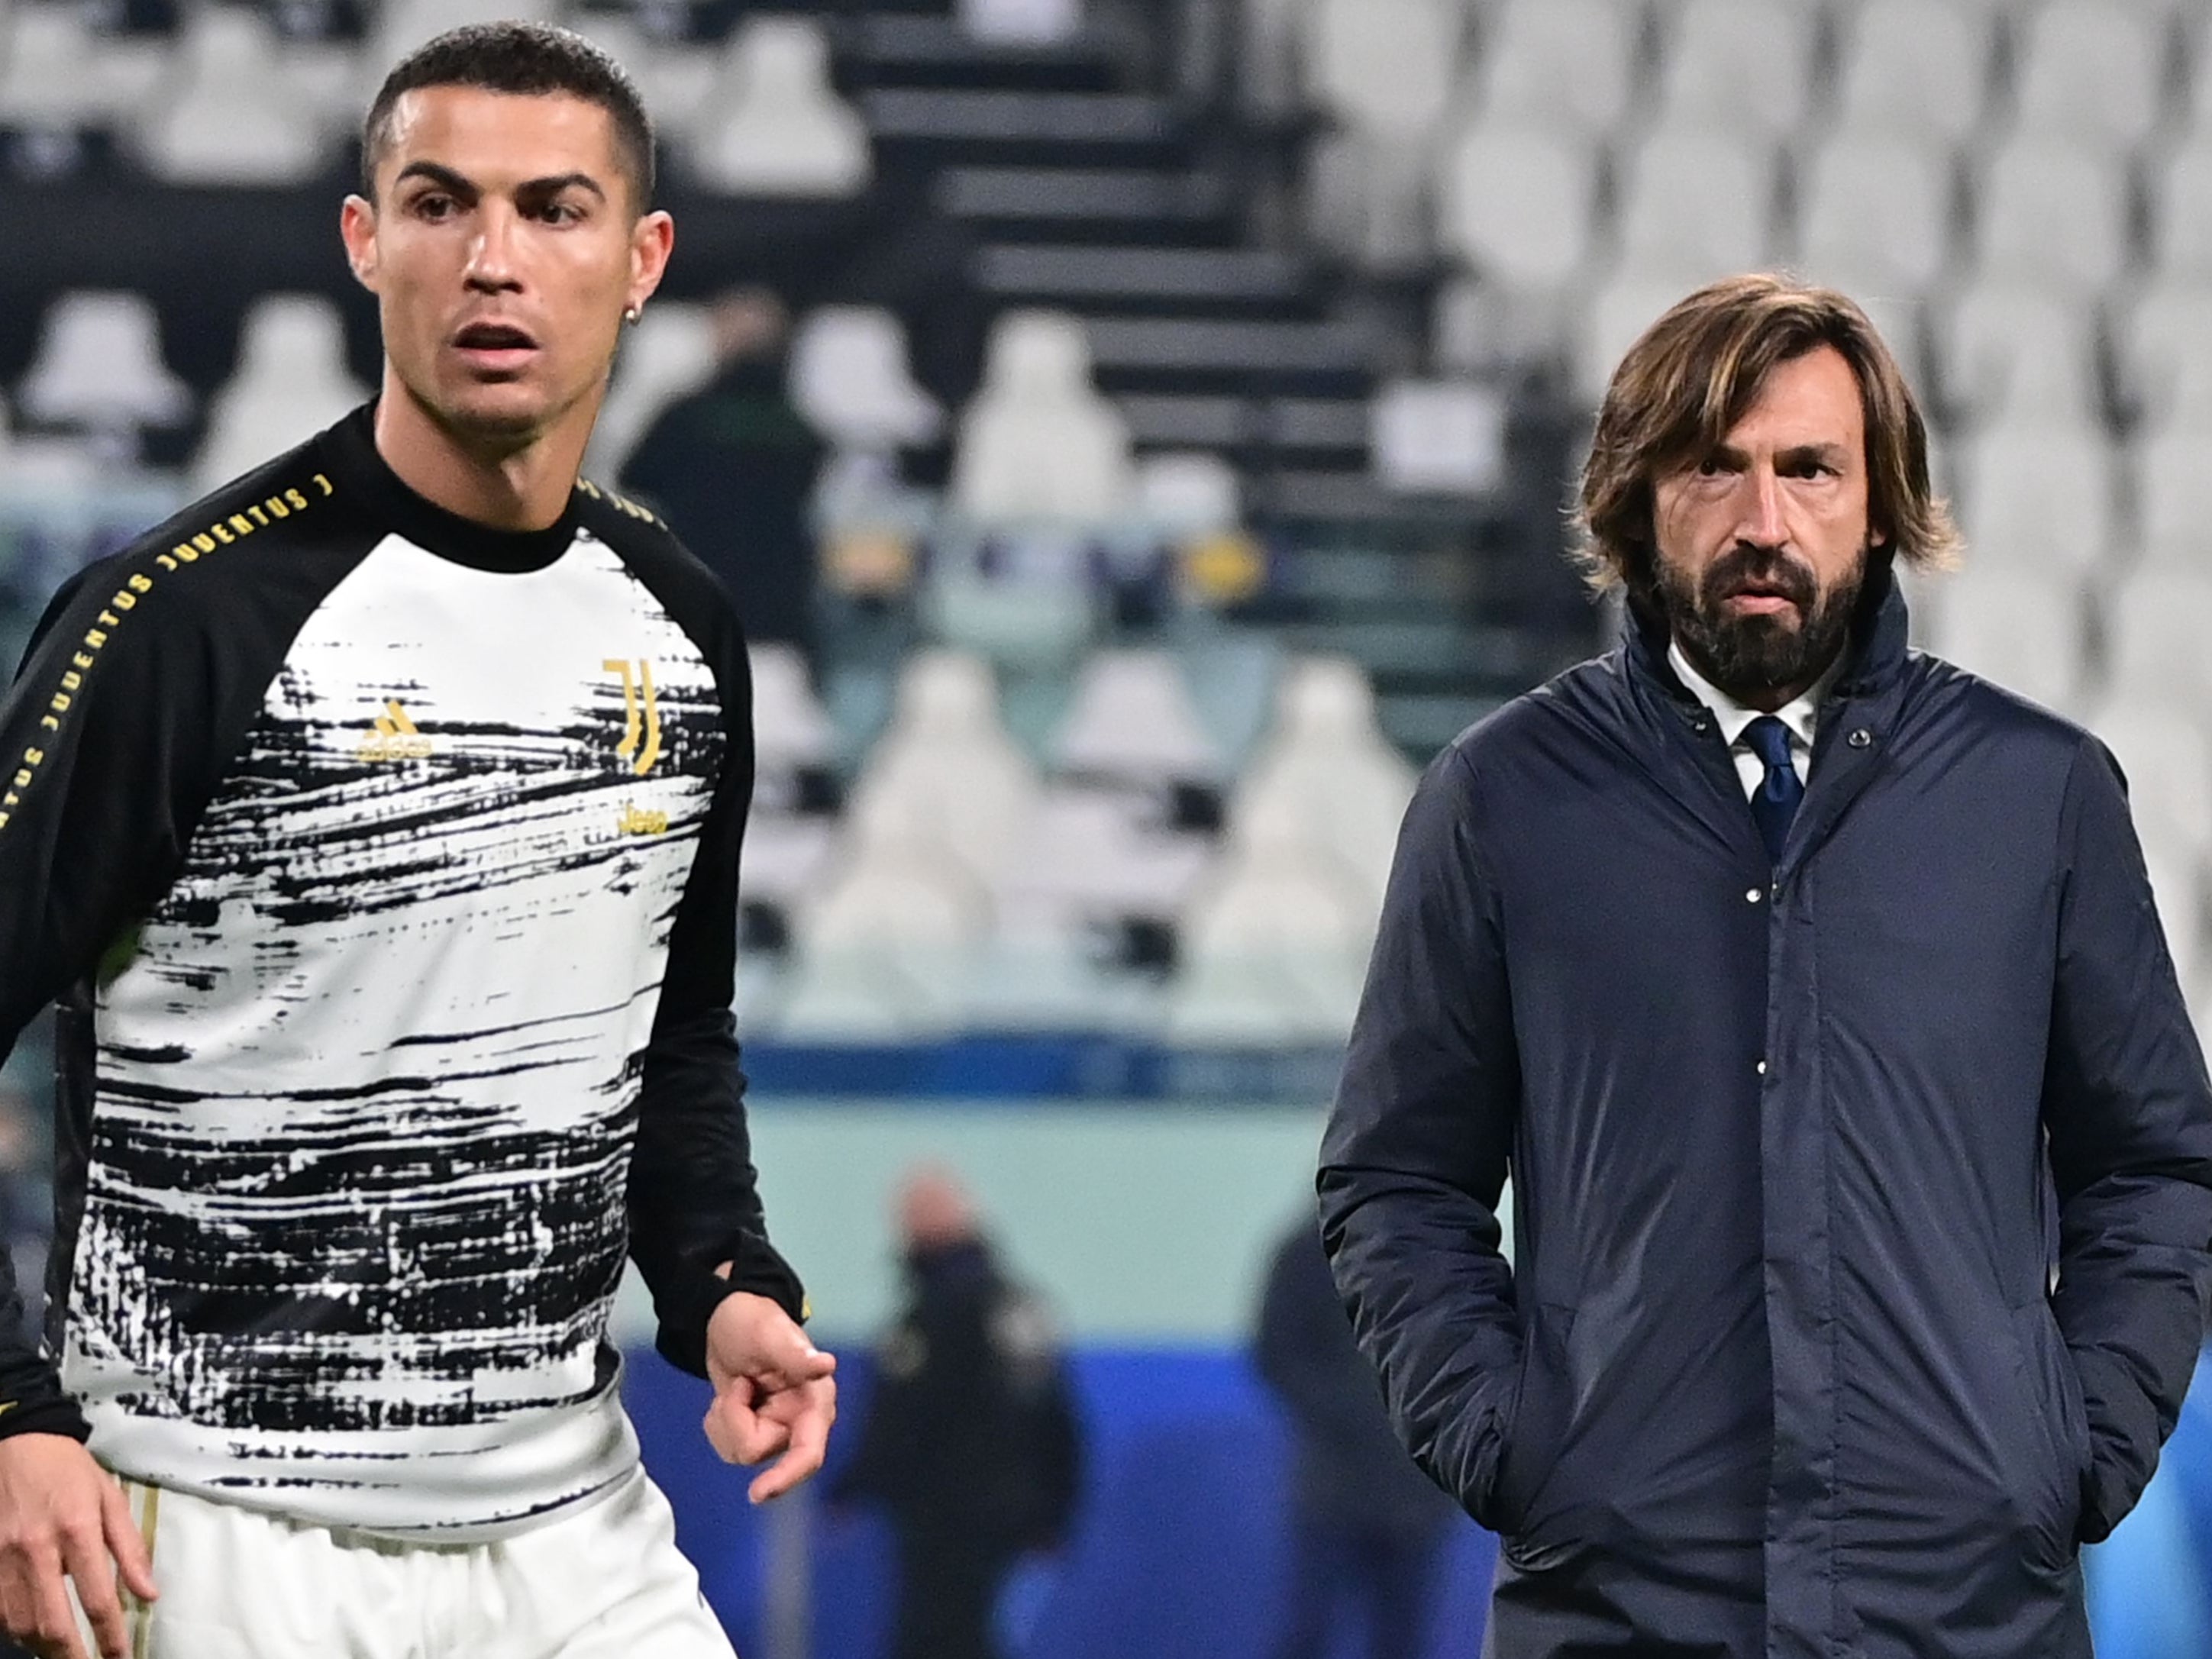 Both Cristiano Ronaldo and manager Andrea Pirlo have been criticised this season